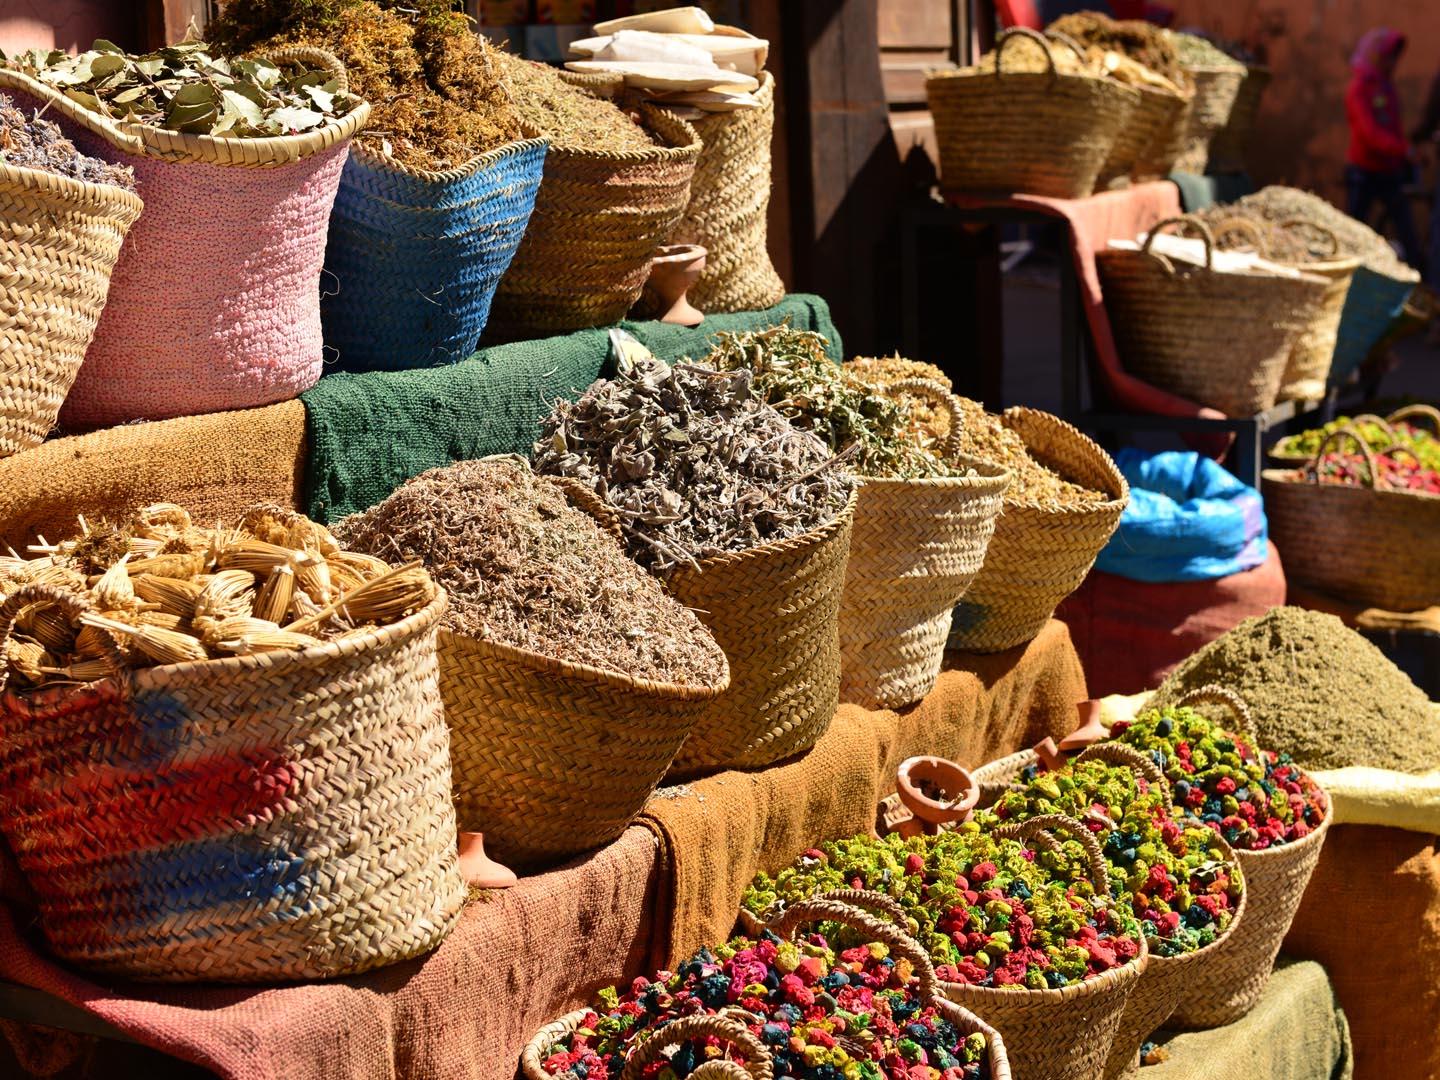 Market stall herbs and spices for sale near Palace El Badi.